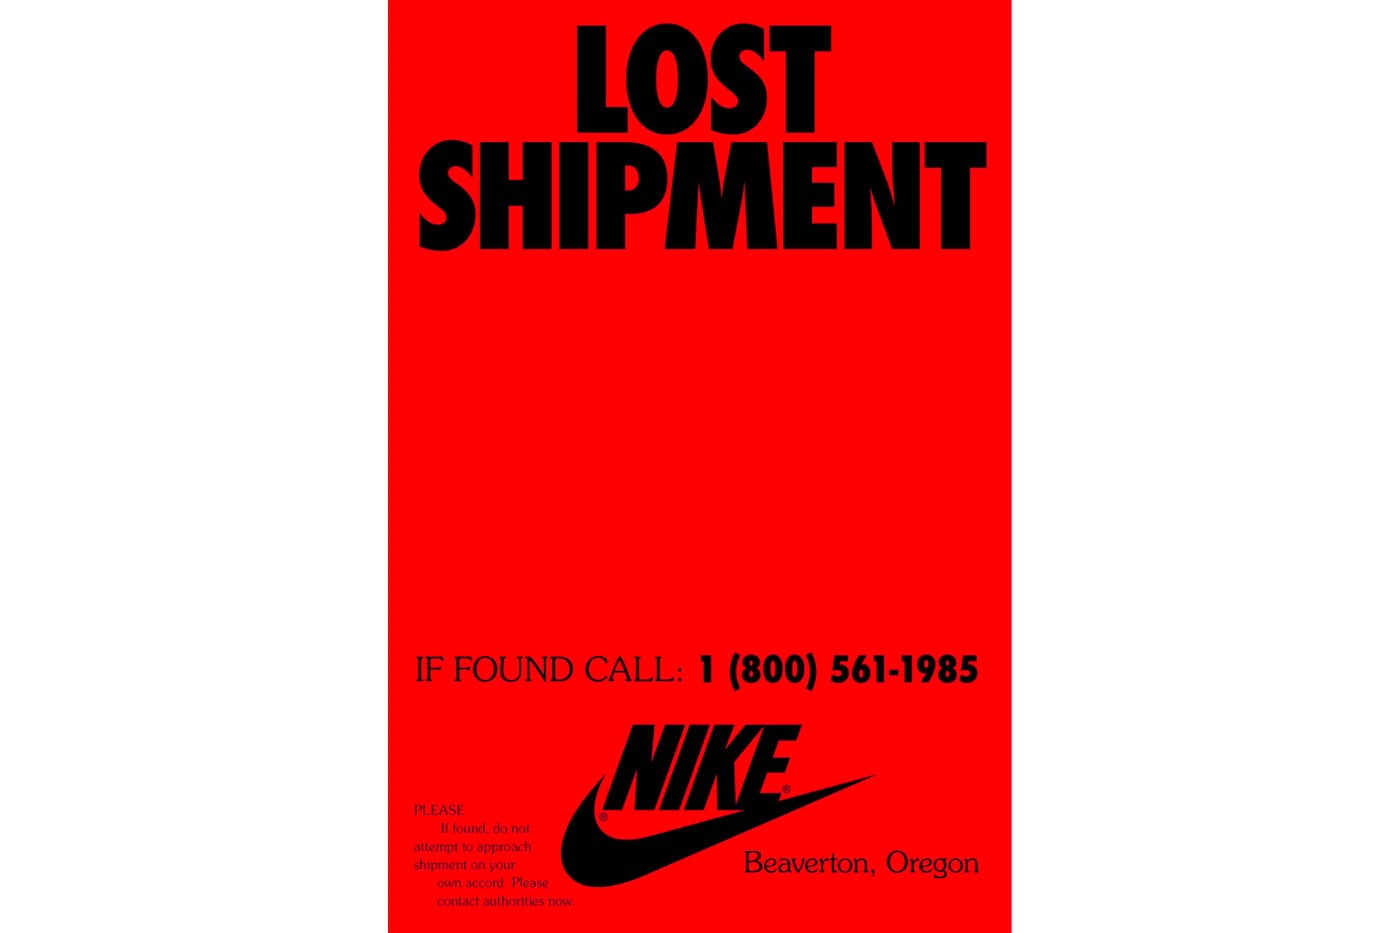 the slogan of the first nike dunk advertising campaign in 1985